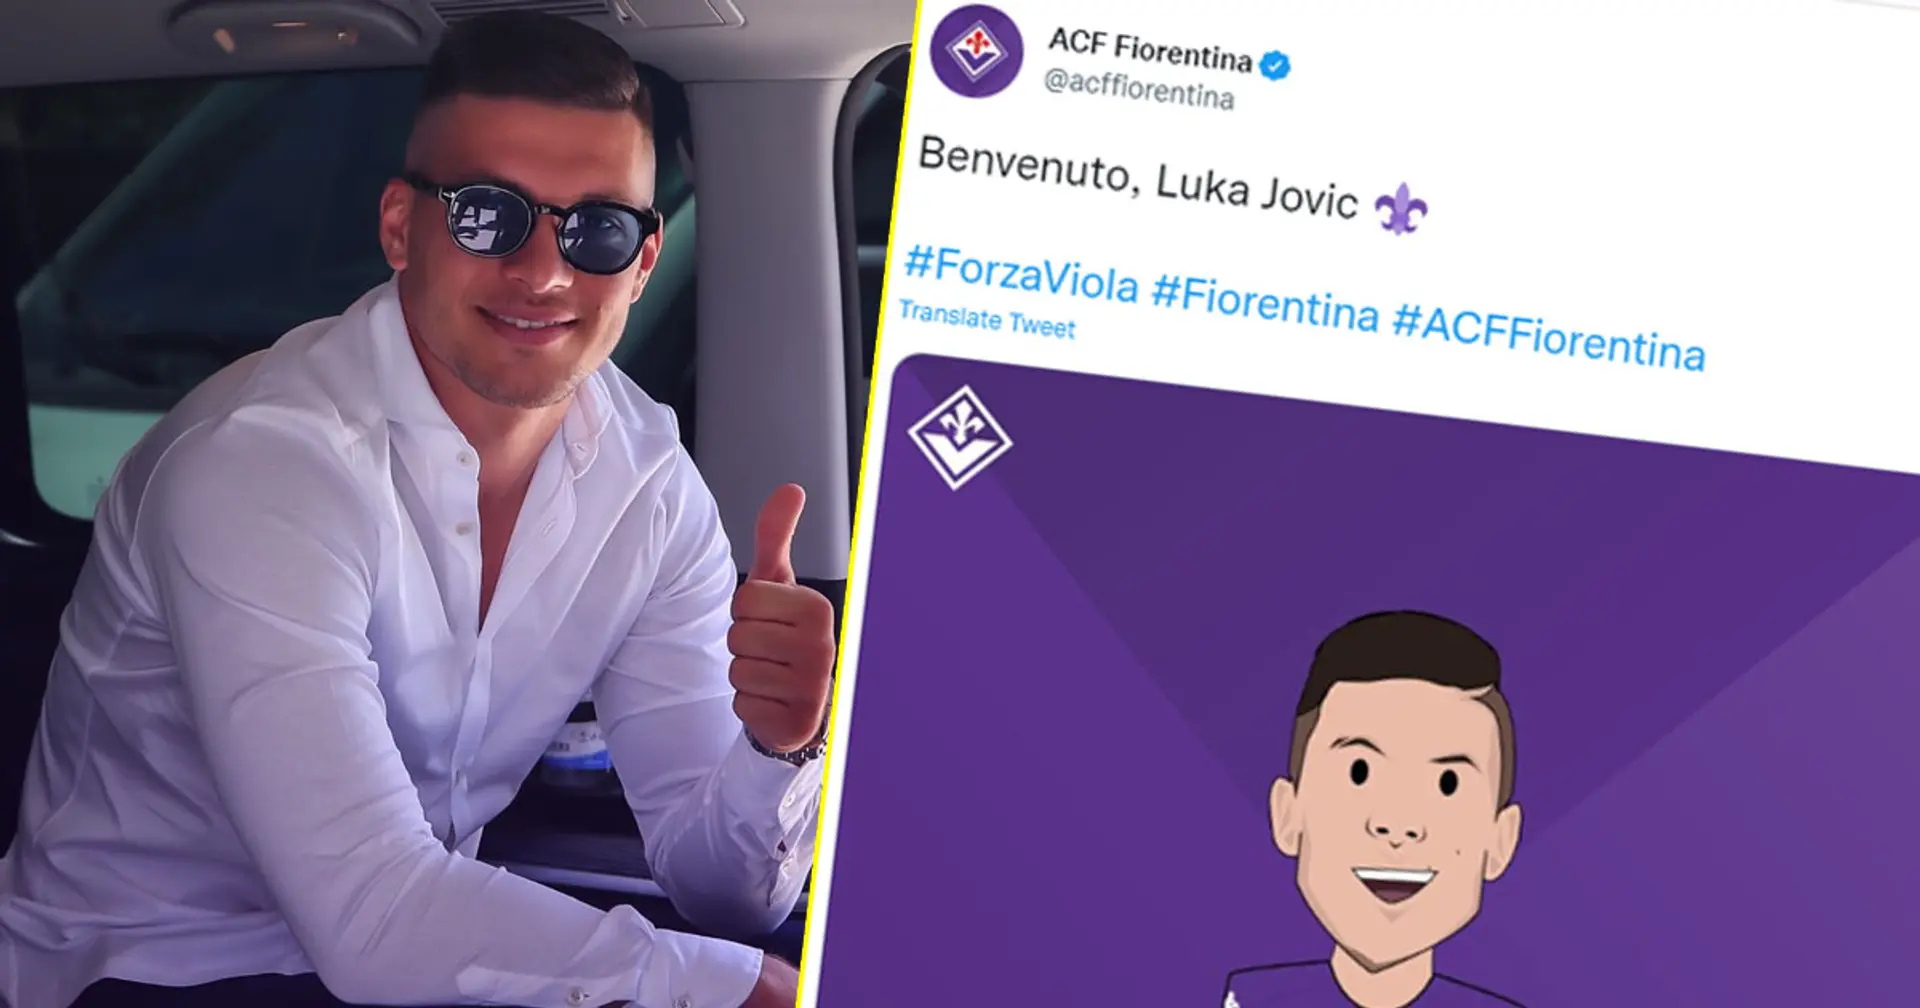 OFFICIAL: Jovic joins Fiorentina